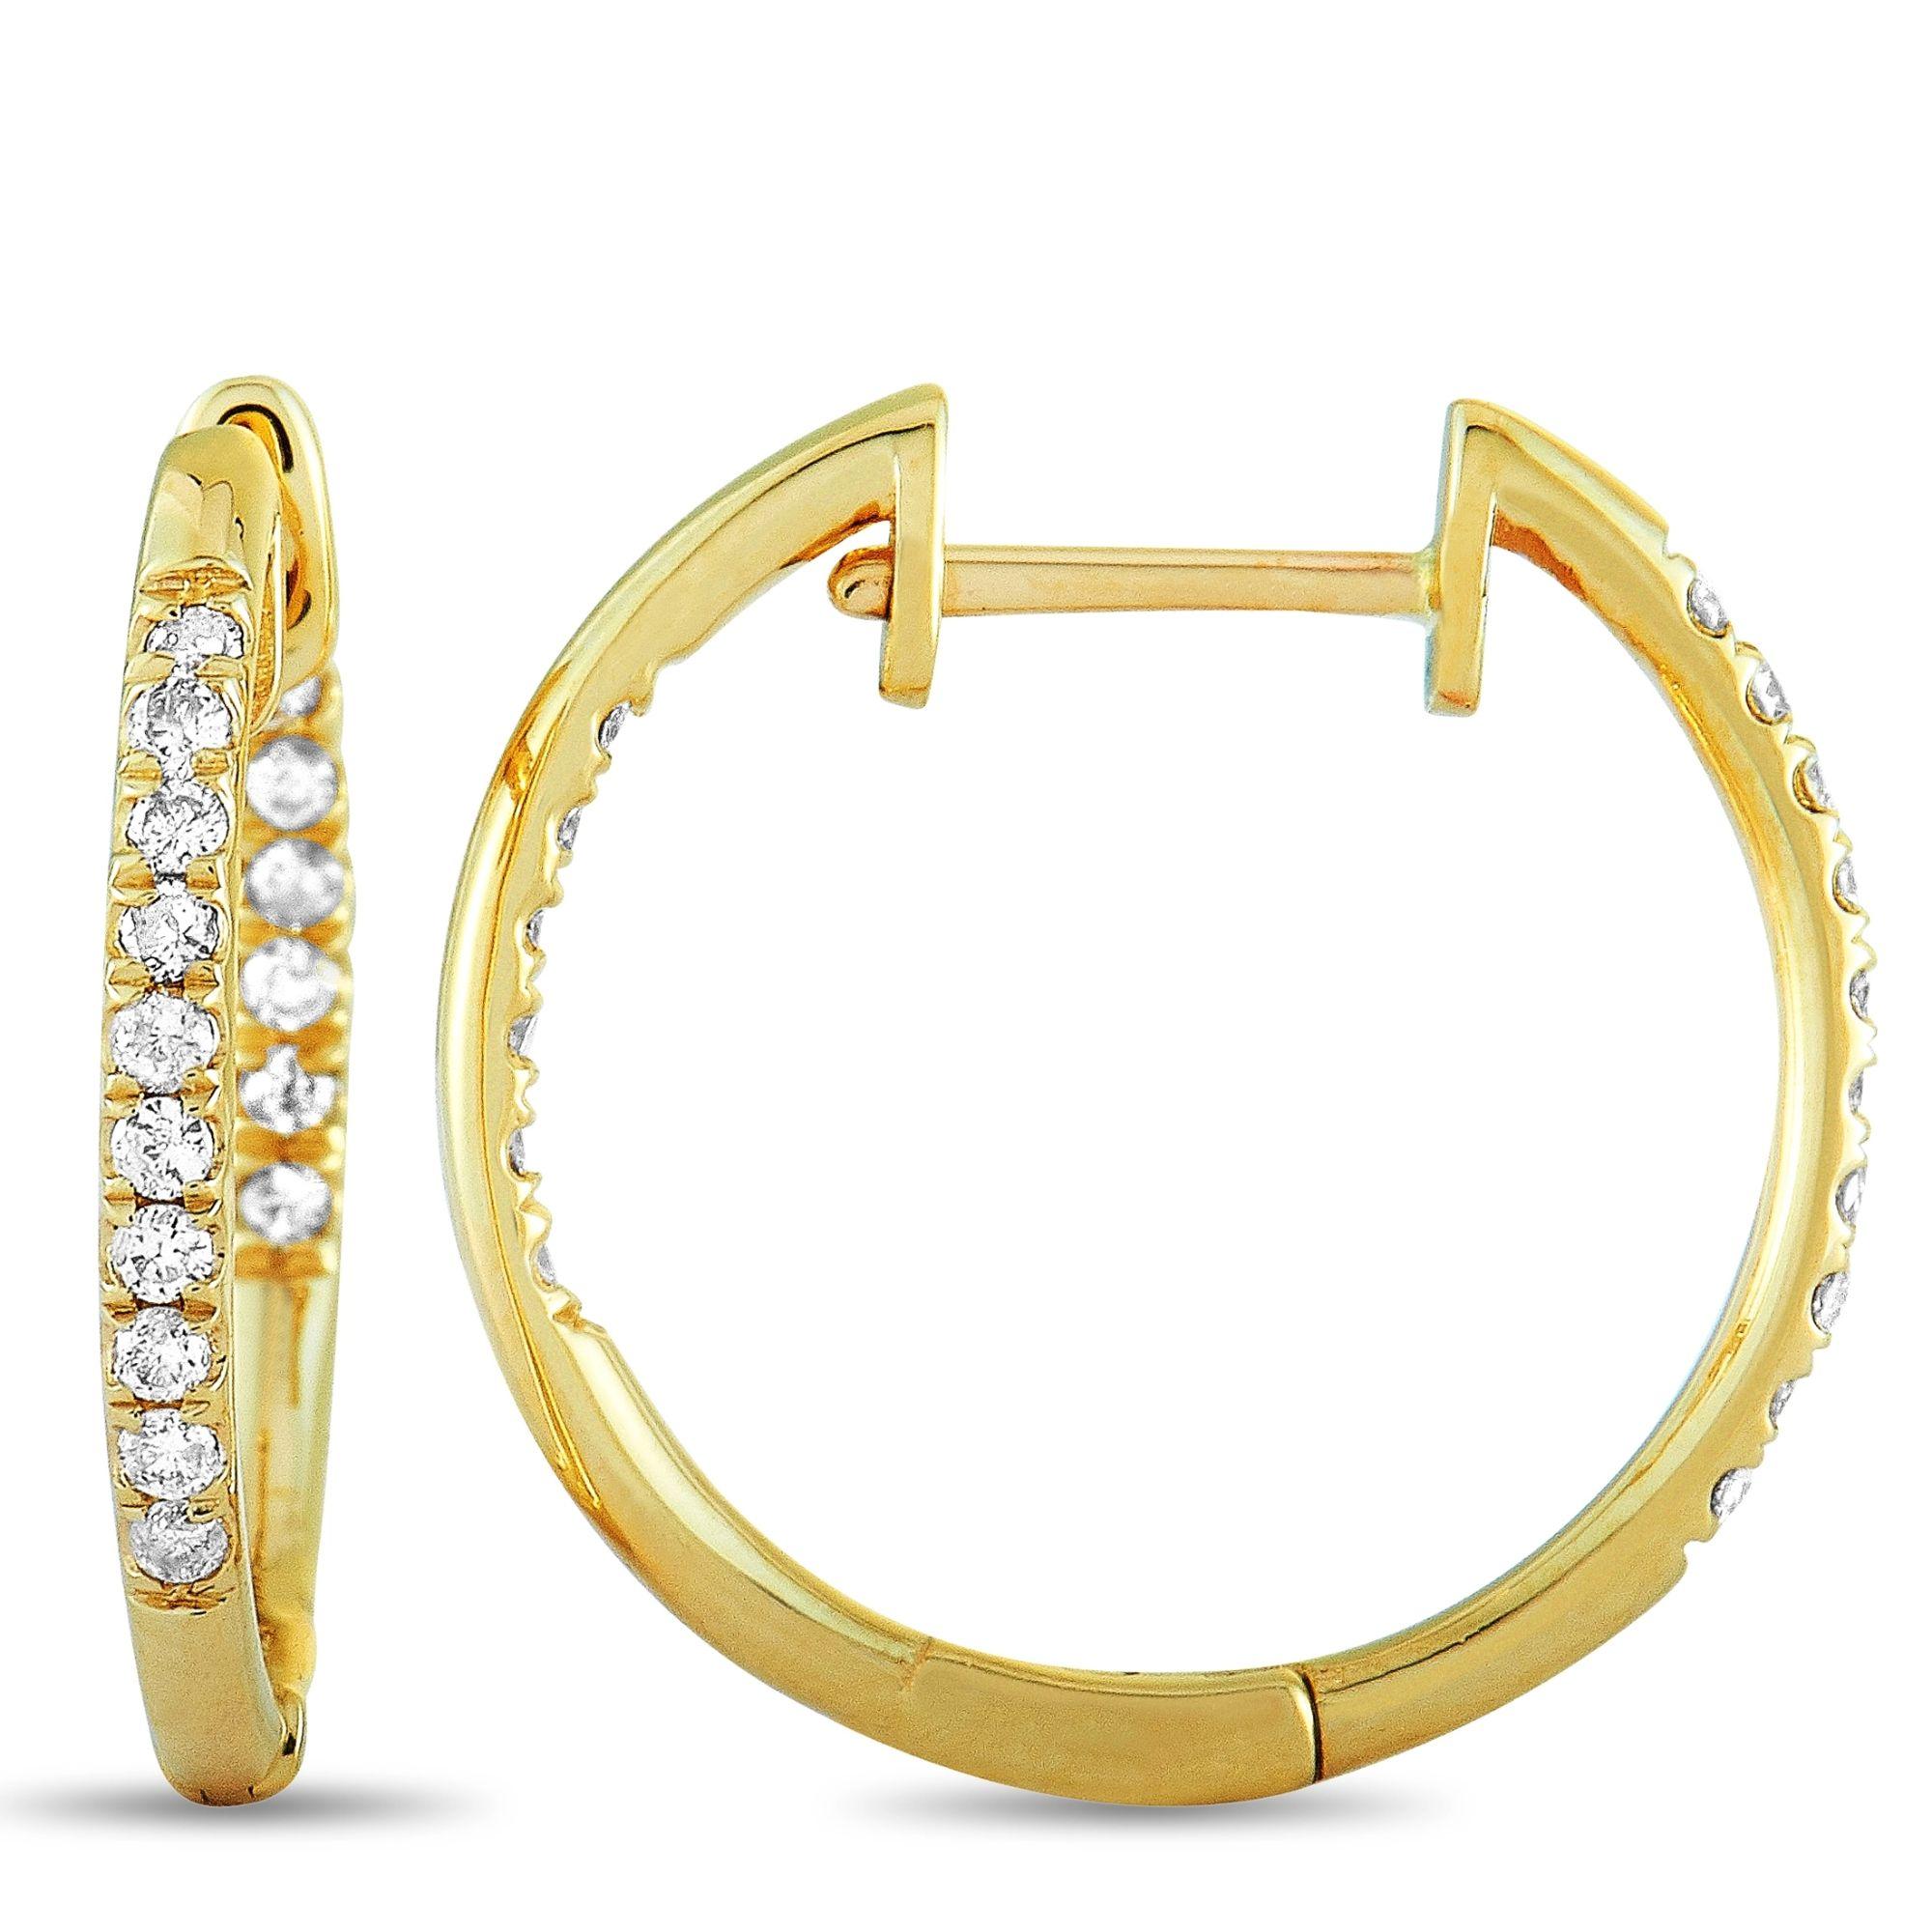 These LB Exclusive hoop earrings are made out of 14K yellow gold and diamonds that total 0.25 carats. The earrings measure 0.70” in length and 0.65” in width, and each of the two weighs 1.05 grams.
 
 The pair is offered in brand new condition and